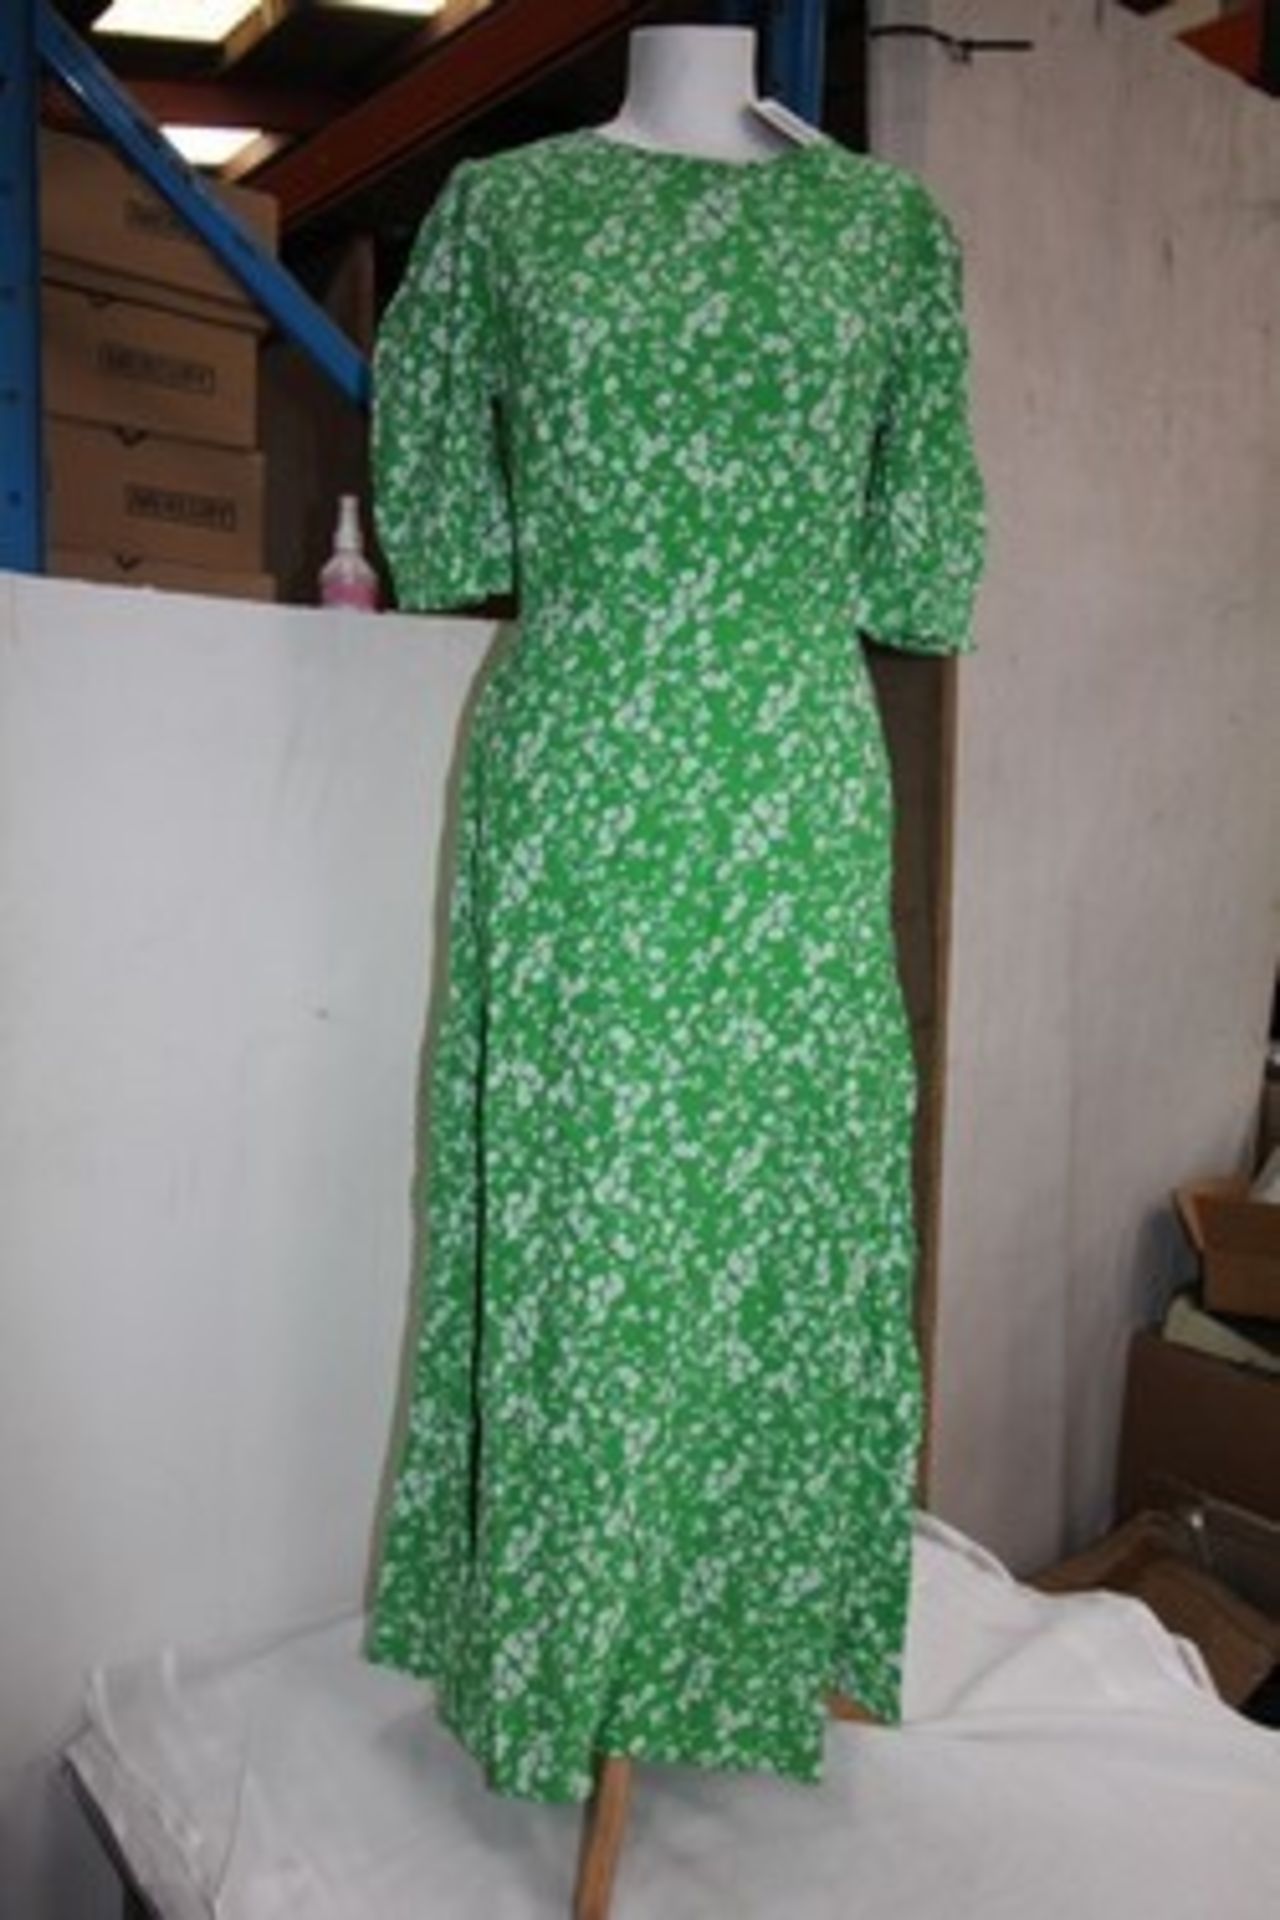 3 x Great Plains Fresh Ditsy fresh green 3/4 length dresses, 1 x size 16 and 2 x size 14 - New in